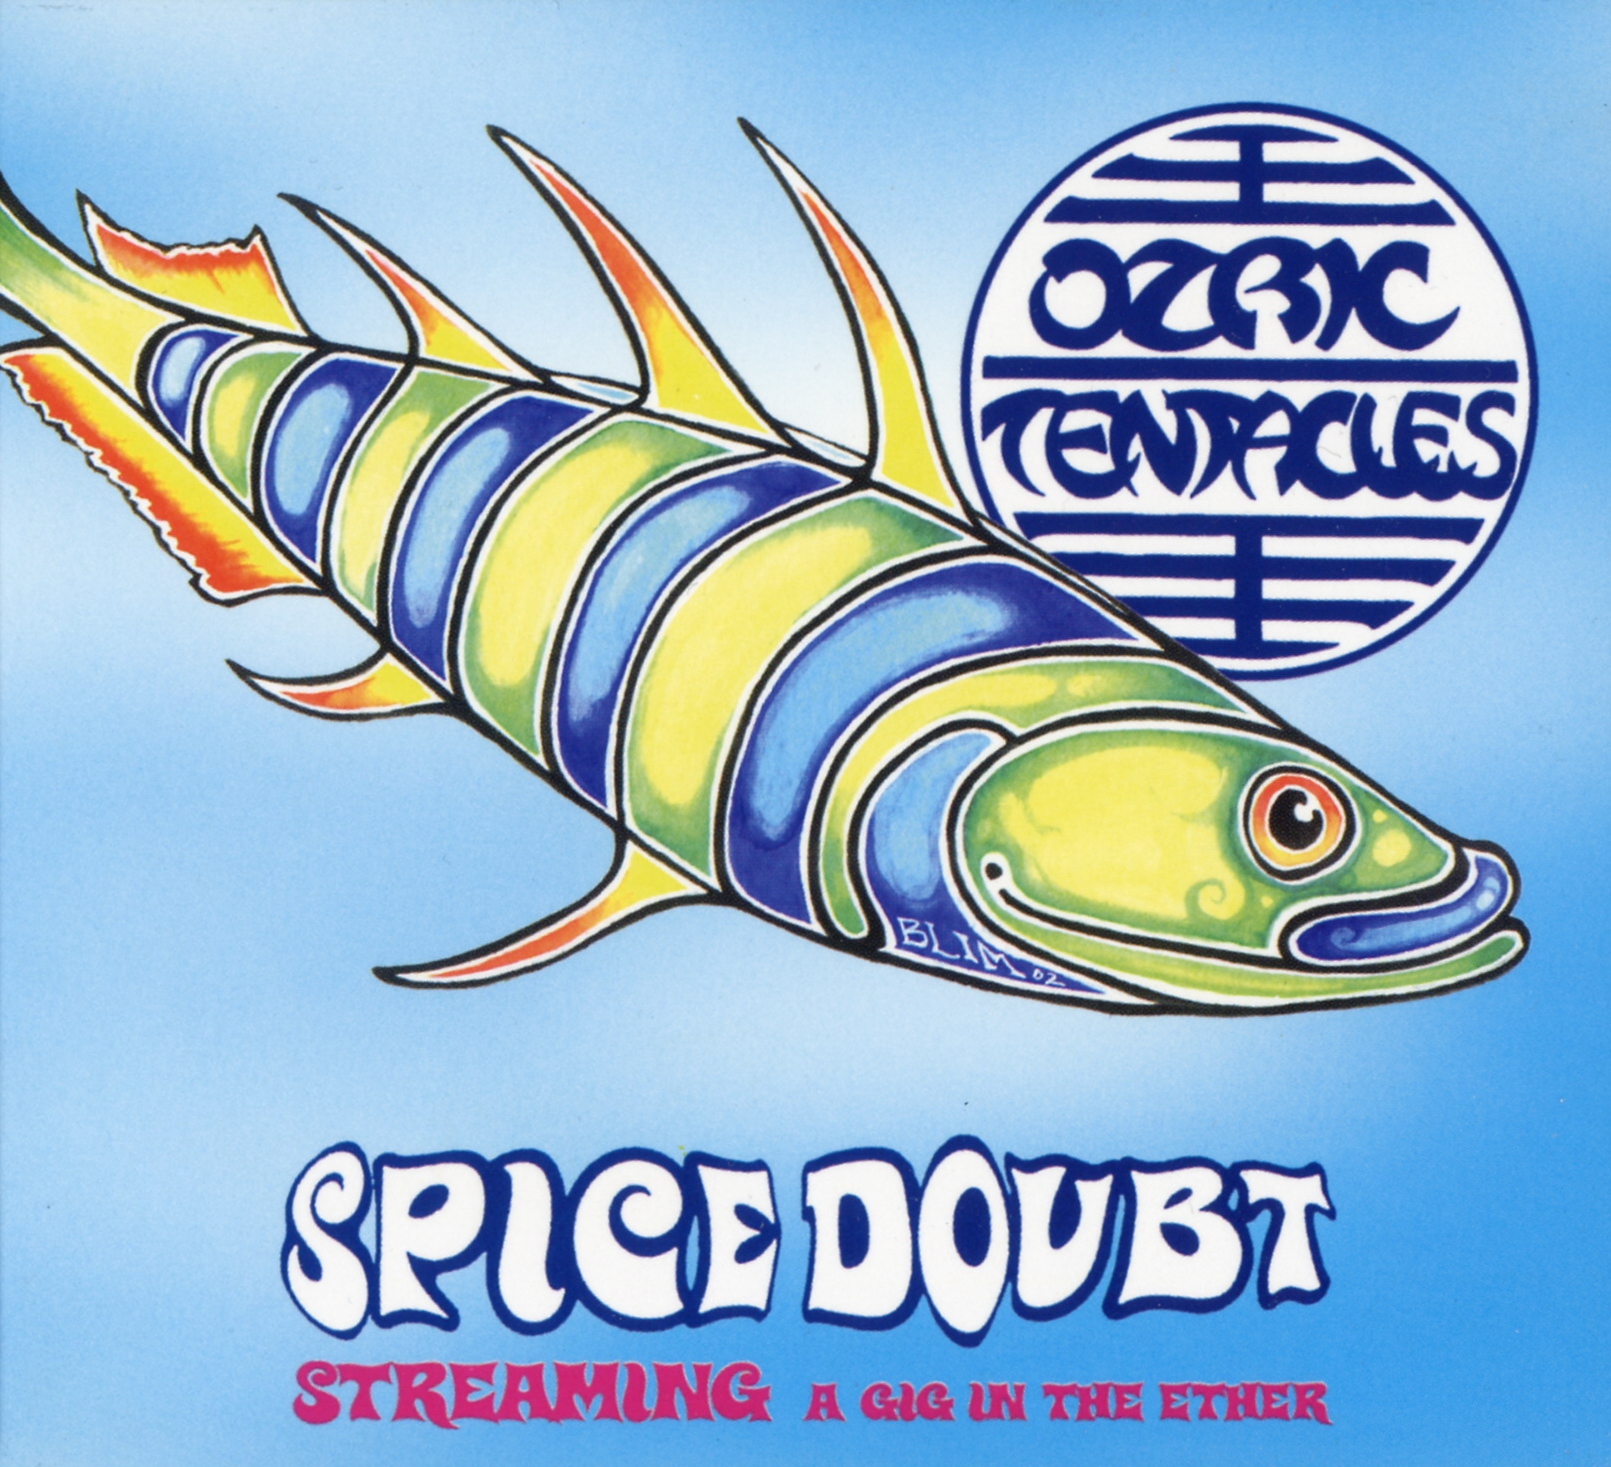 Ozric Tentacles - Spice doubt cover